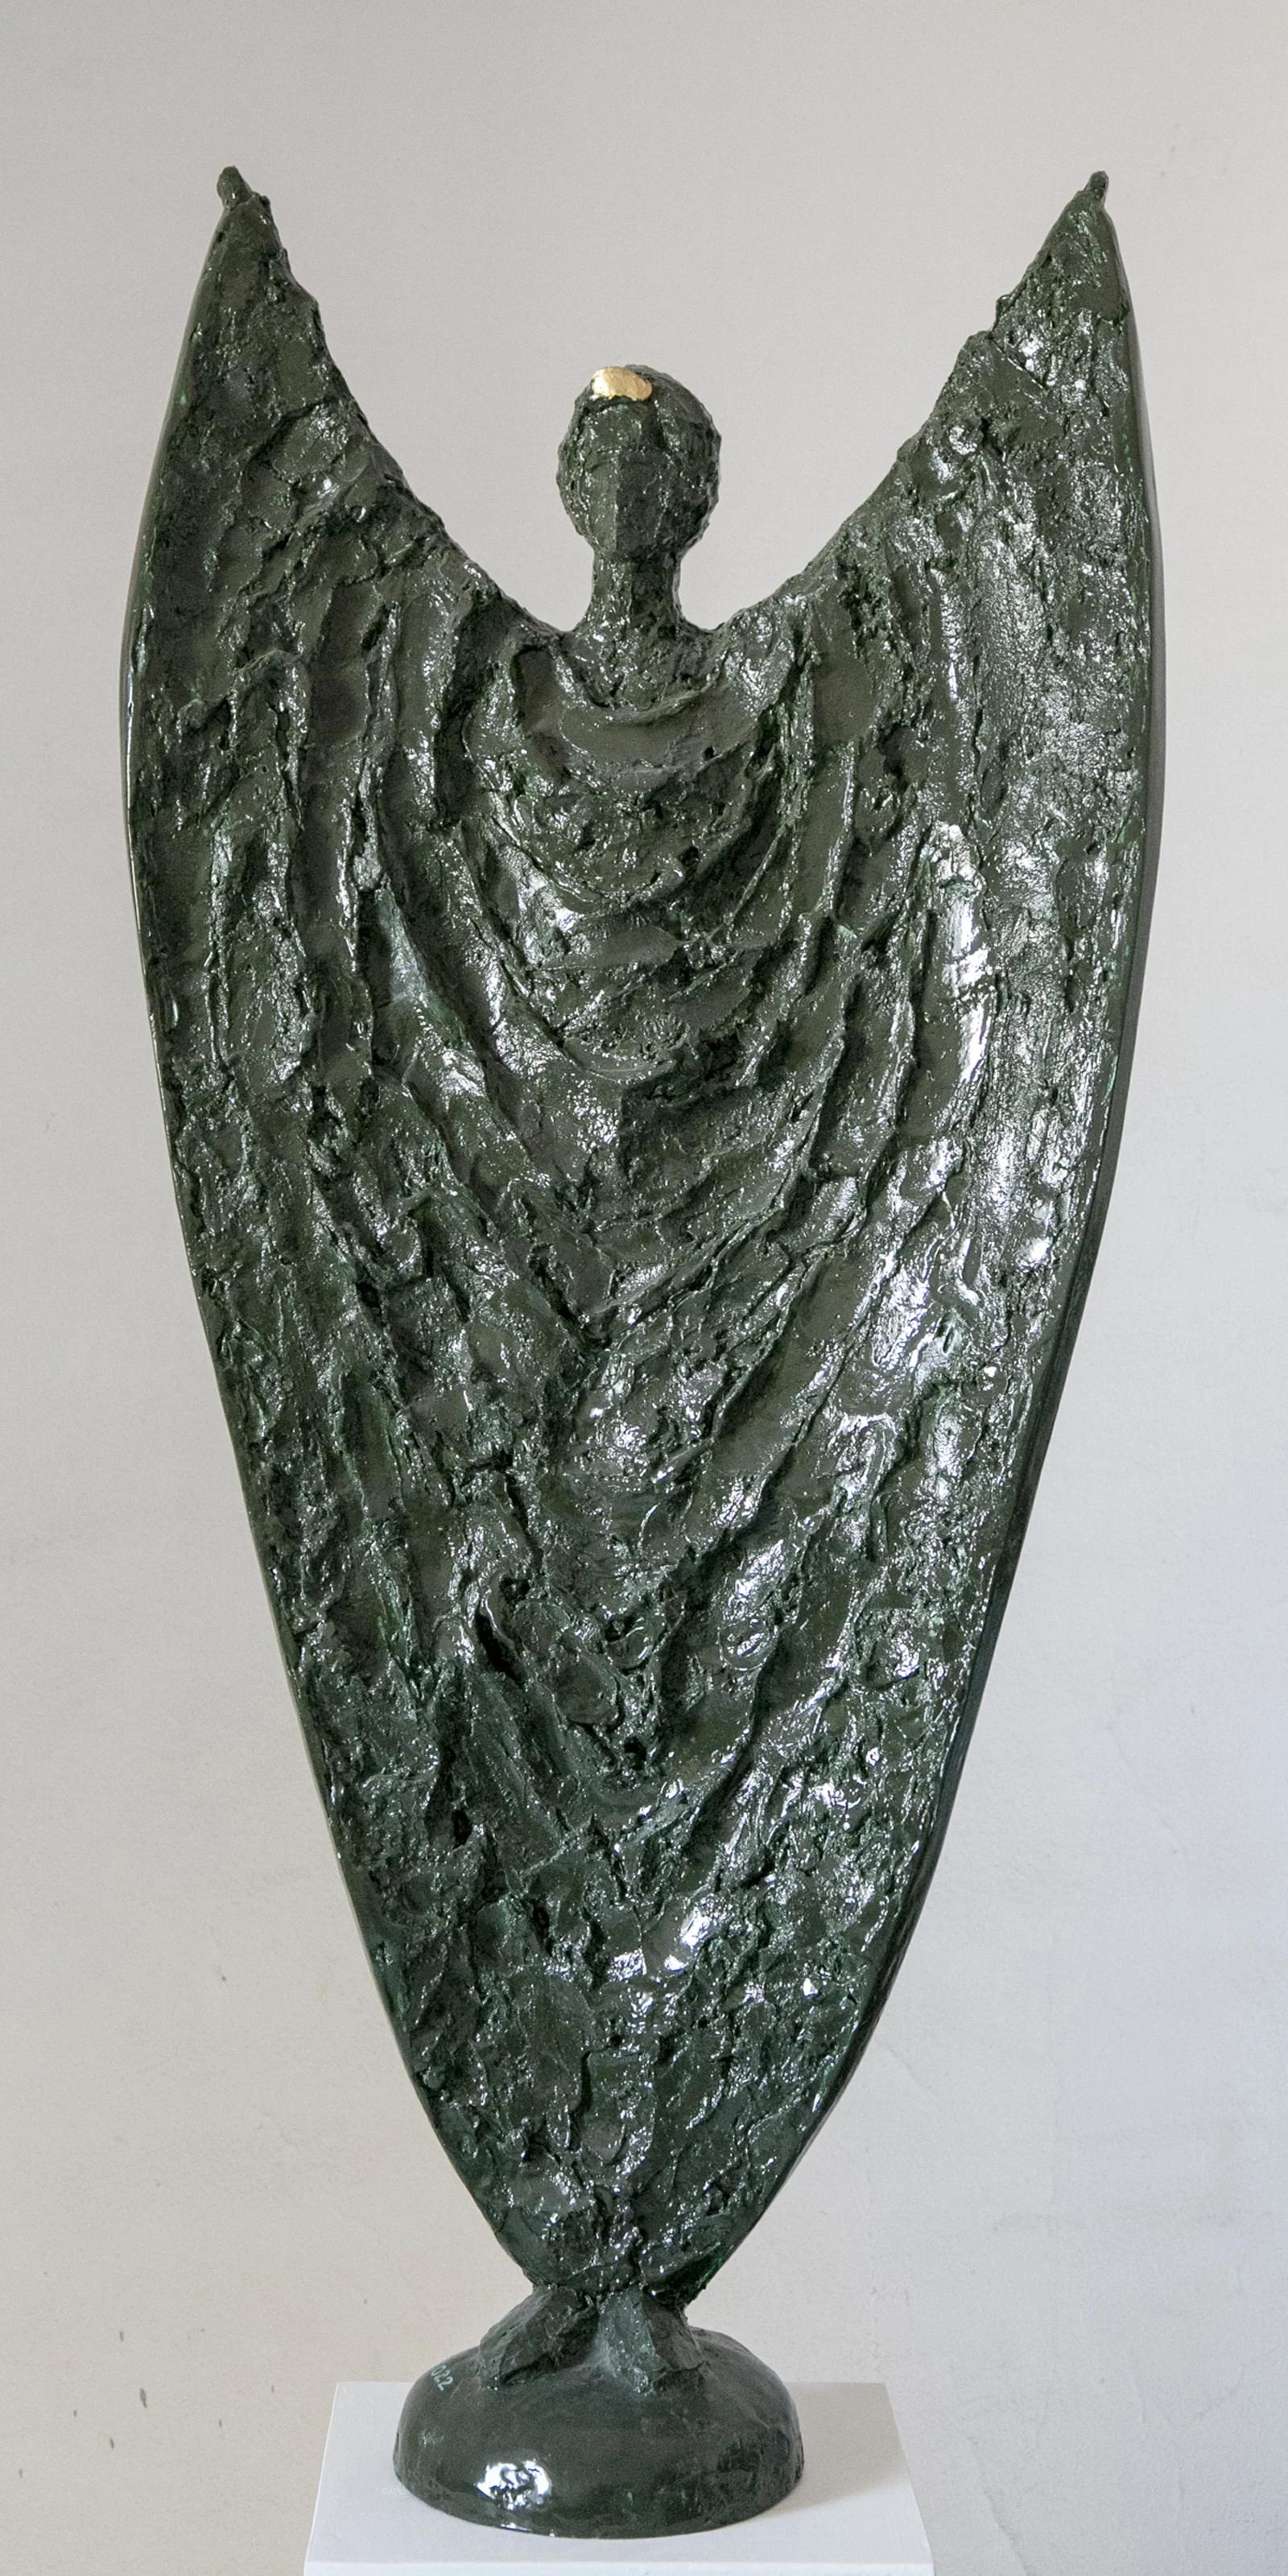 "Freedom II" Sculpture 42" x 11" x 5" inch by Sarkis Tossonian


Sarkis Tossoonian was born in Alexandria in 1953. He graduated from the Faculty of Fine Arts/Sculpture in 1979. He started exhibiting in individual and group exhibitions in Alexandria